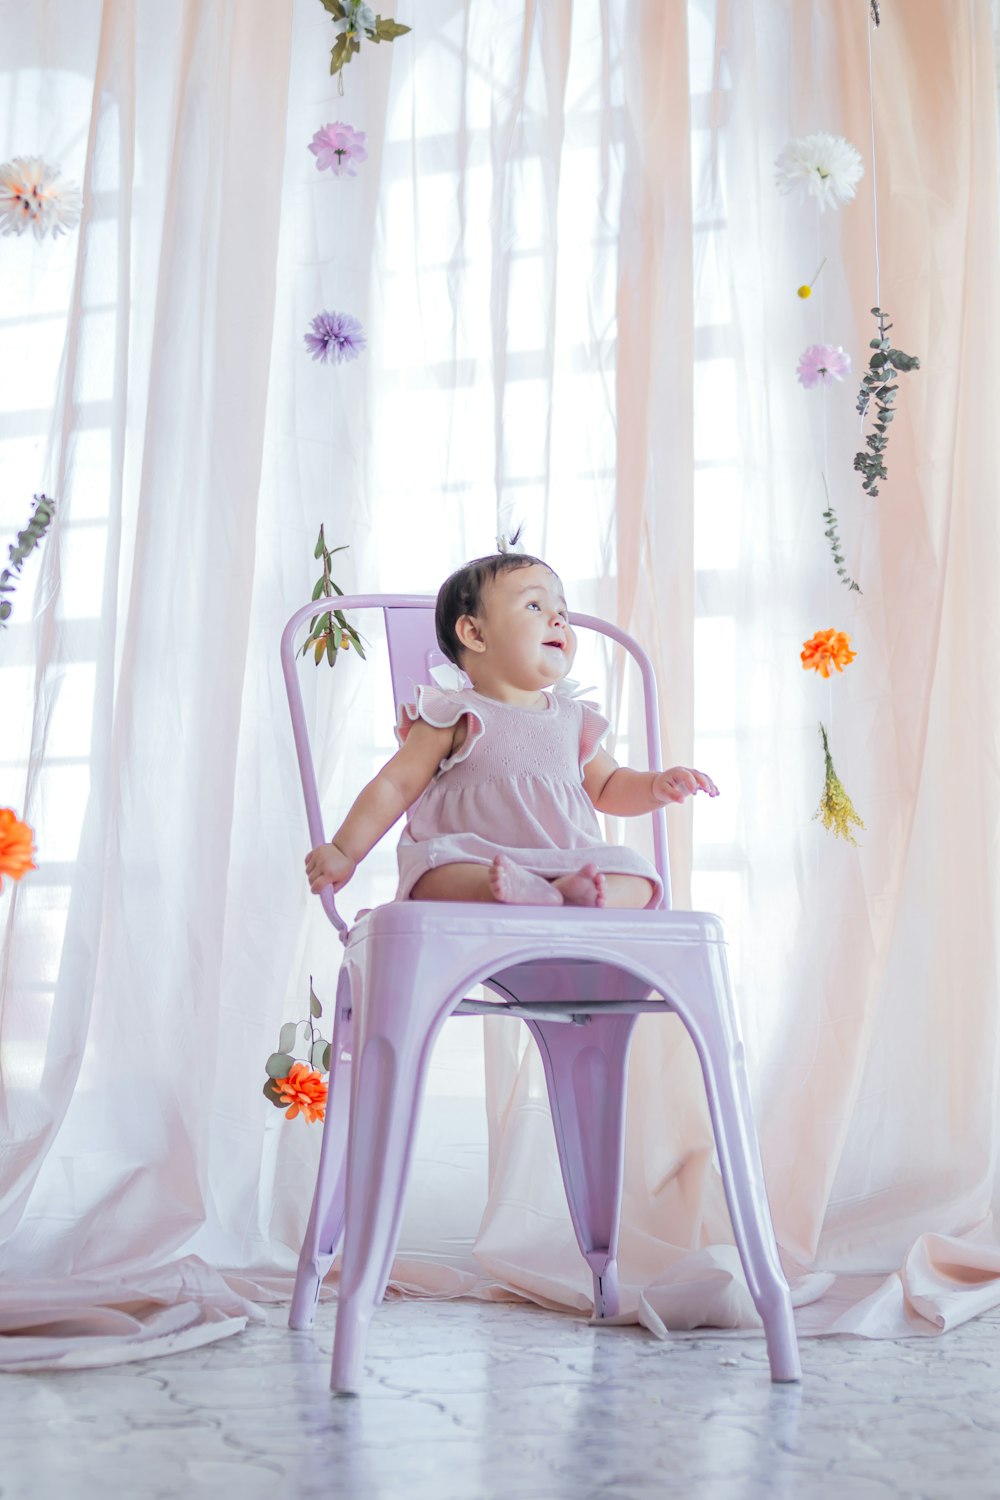 a baby sitting on a purple chair in front of a window